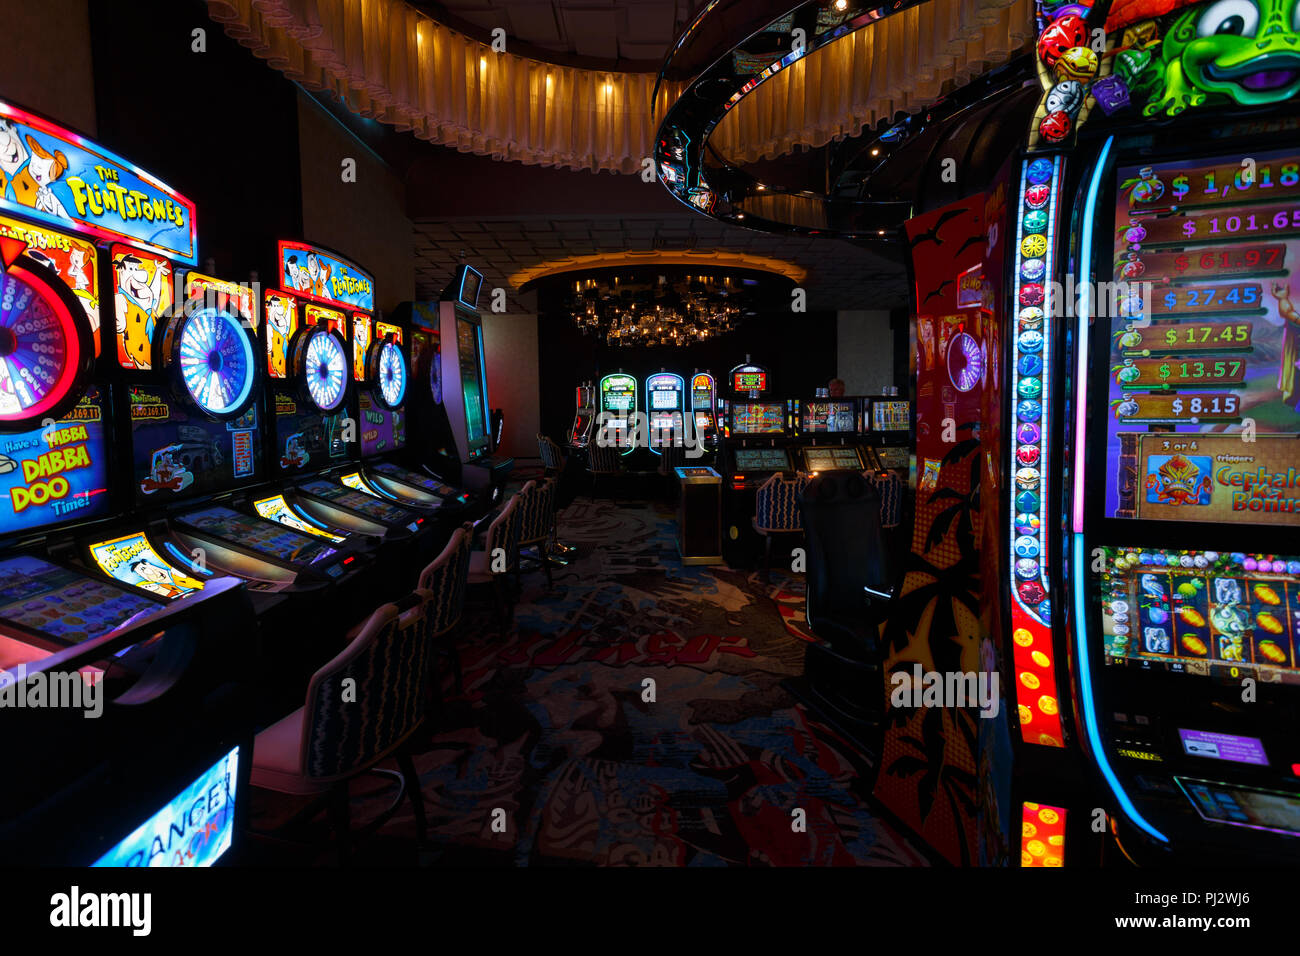 8 Ways To el casino Without Breaking Your Bank